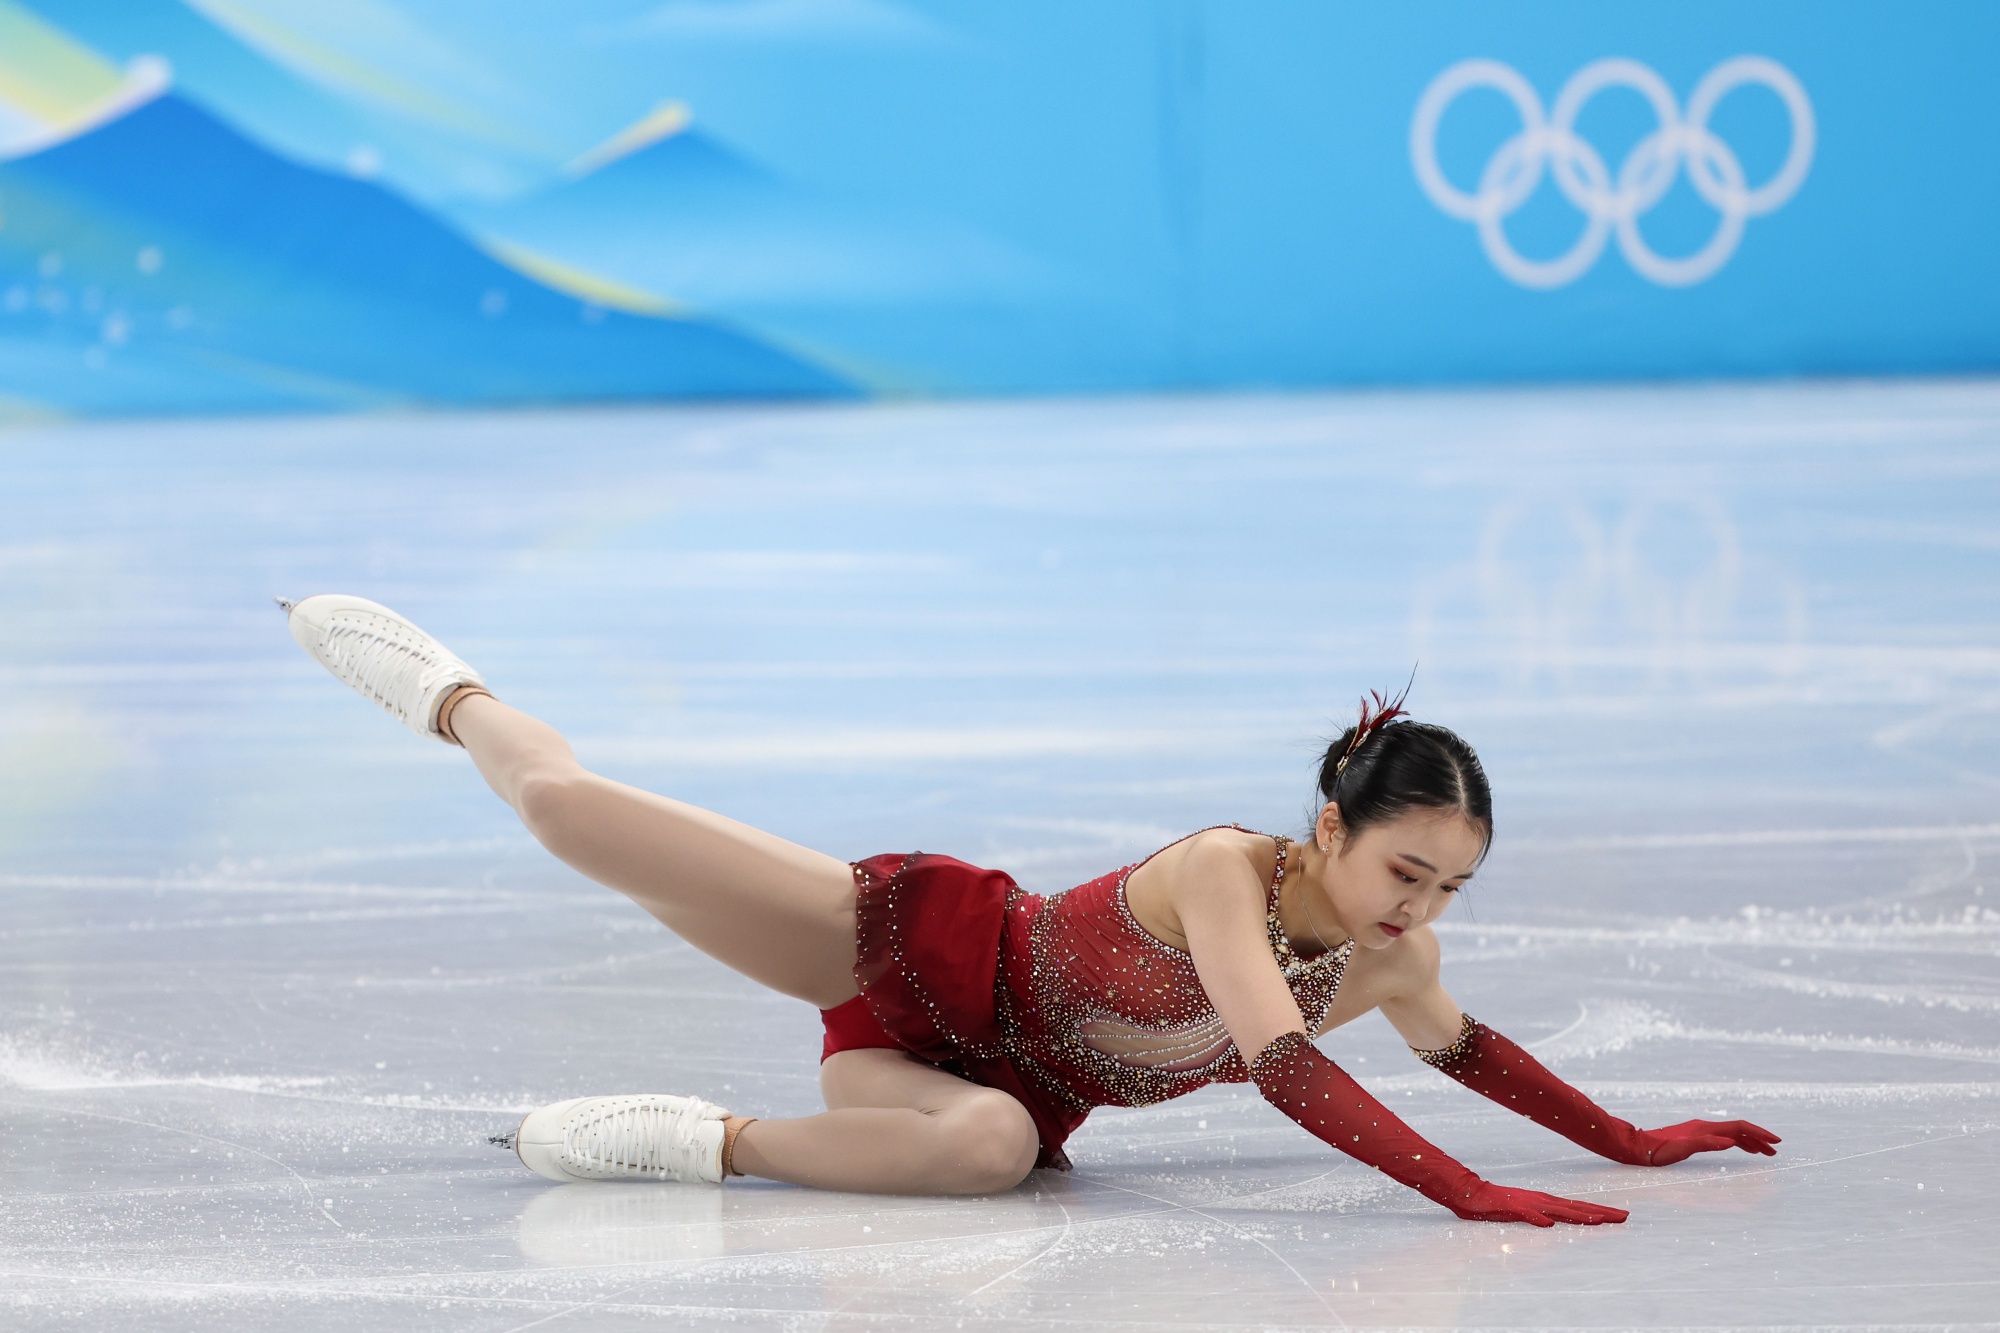 US-Born Skater Zhu Yi Says Online Abuse Affected Her Winter Olympics Performance